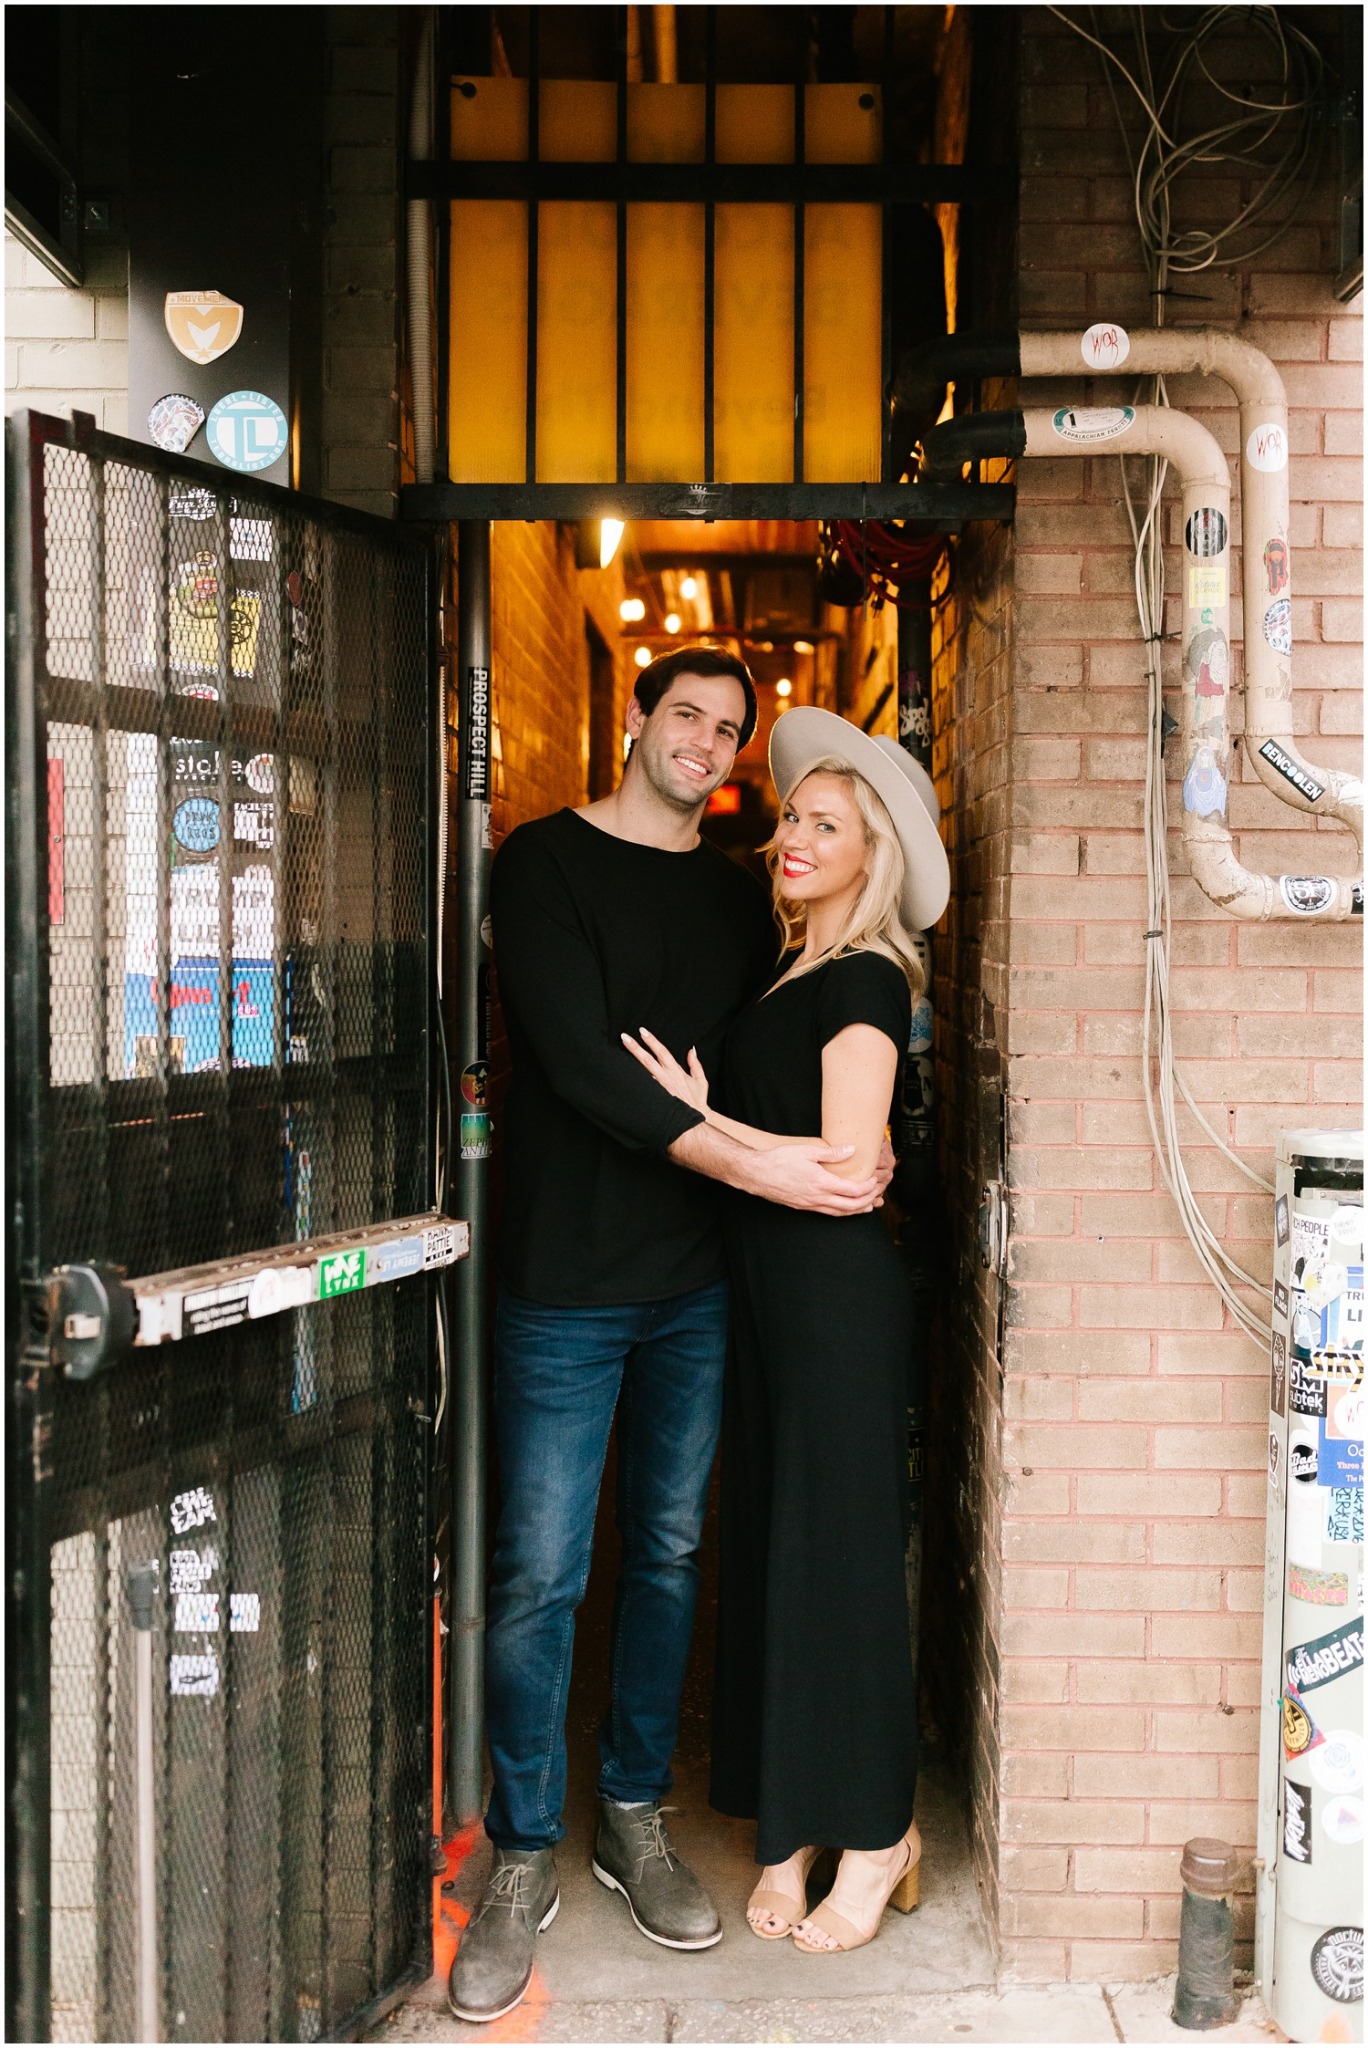 Downtown Raleigh Engagement Session with bride wearing wide brimmed hat